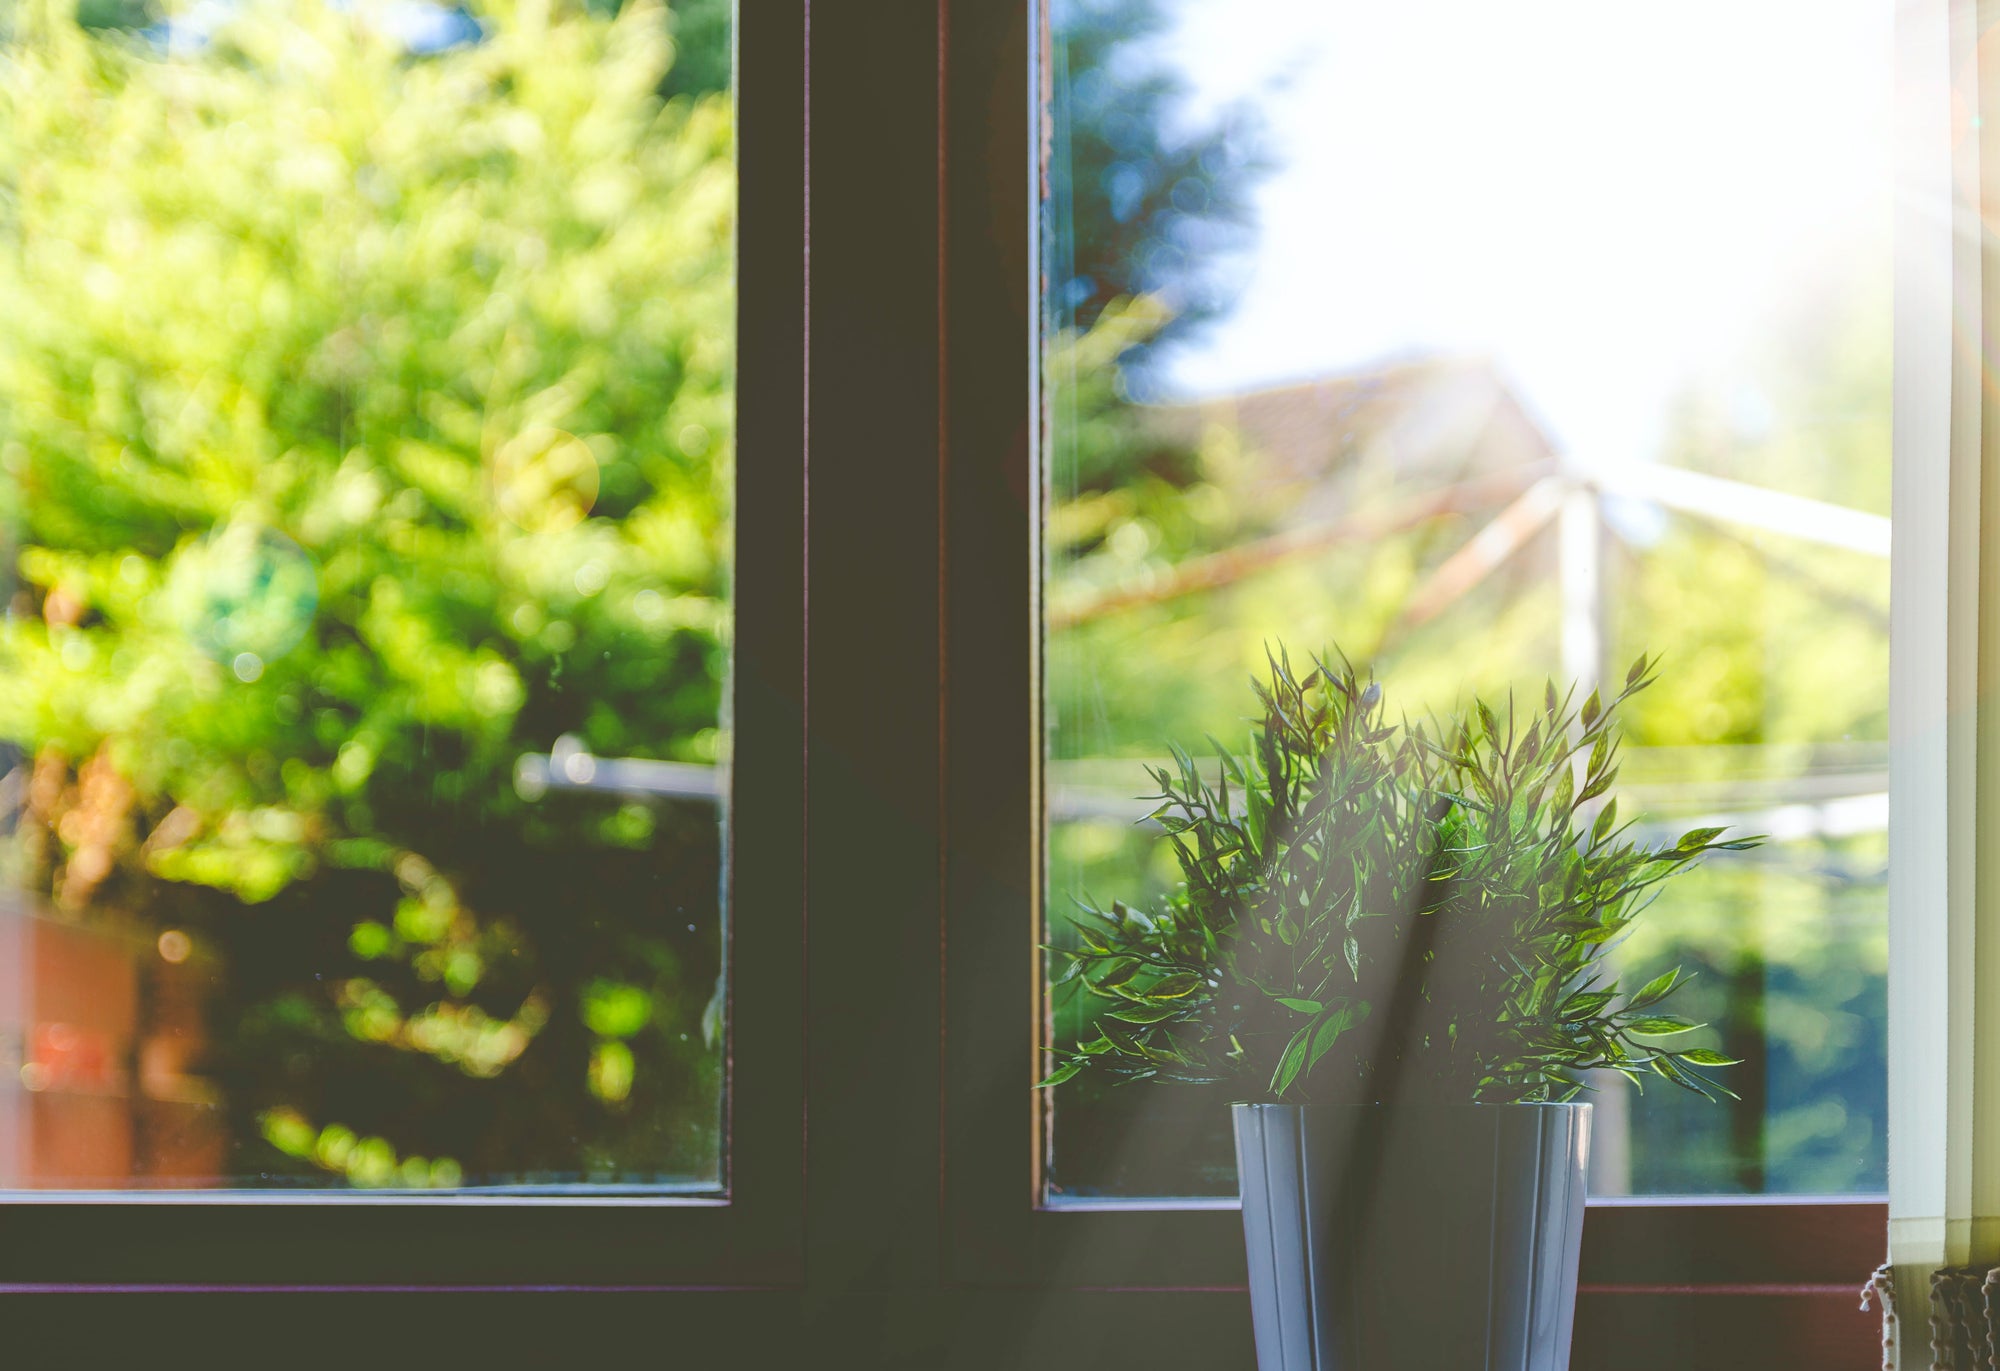 Does Closing the Windows Affect Indoor Air Quality?